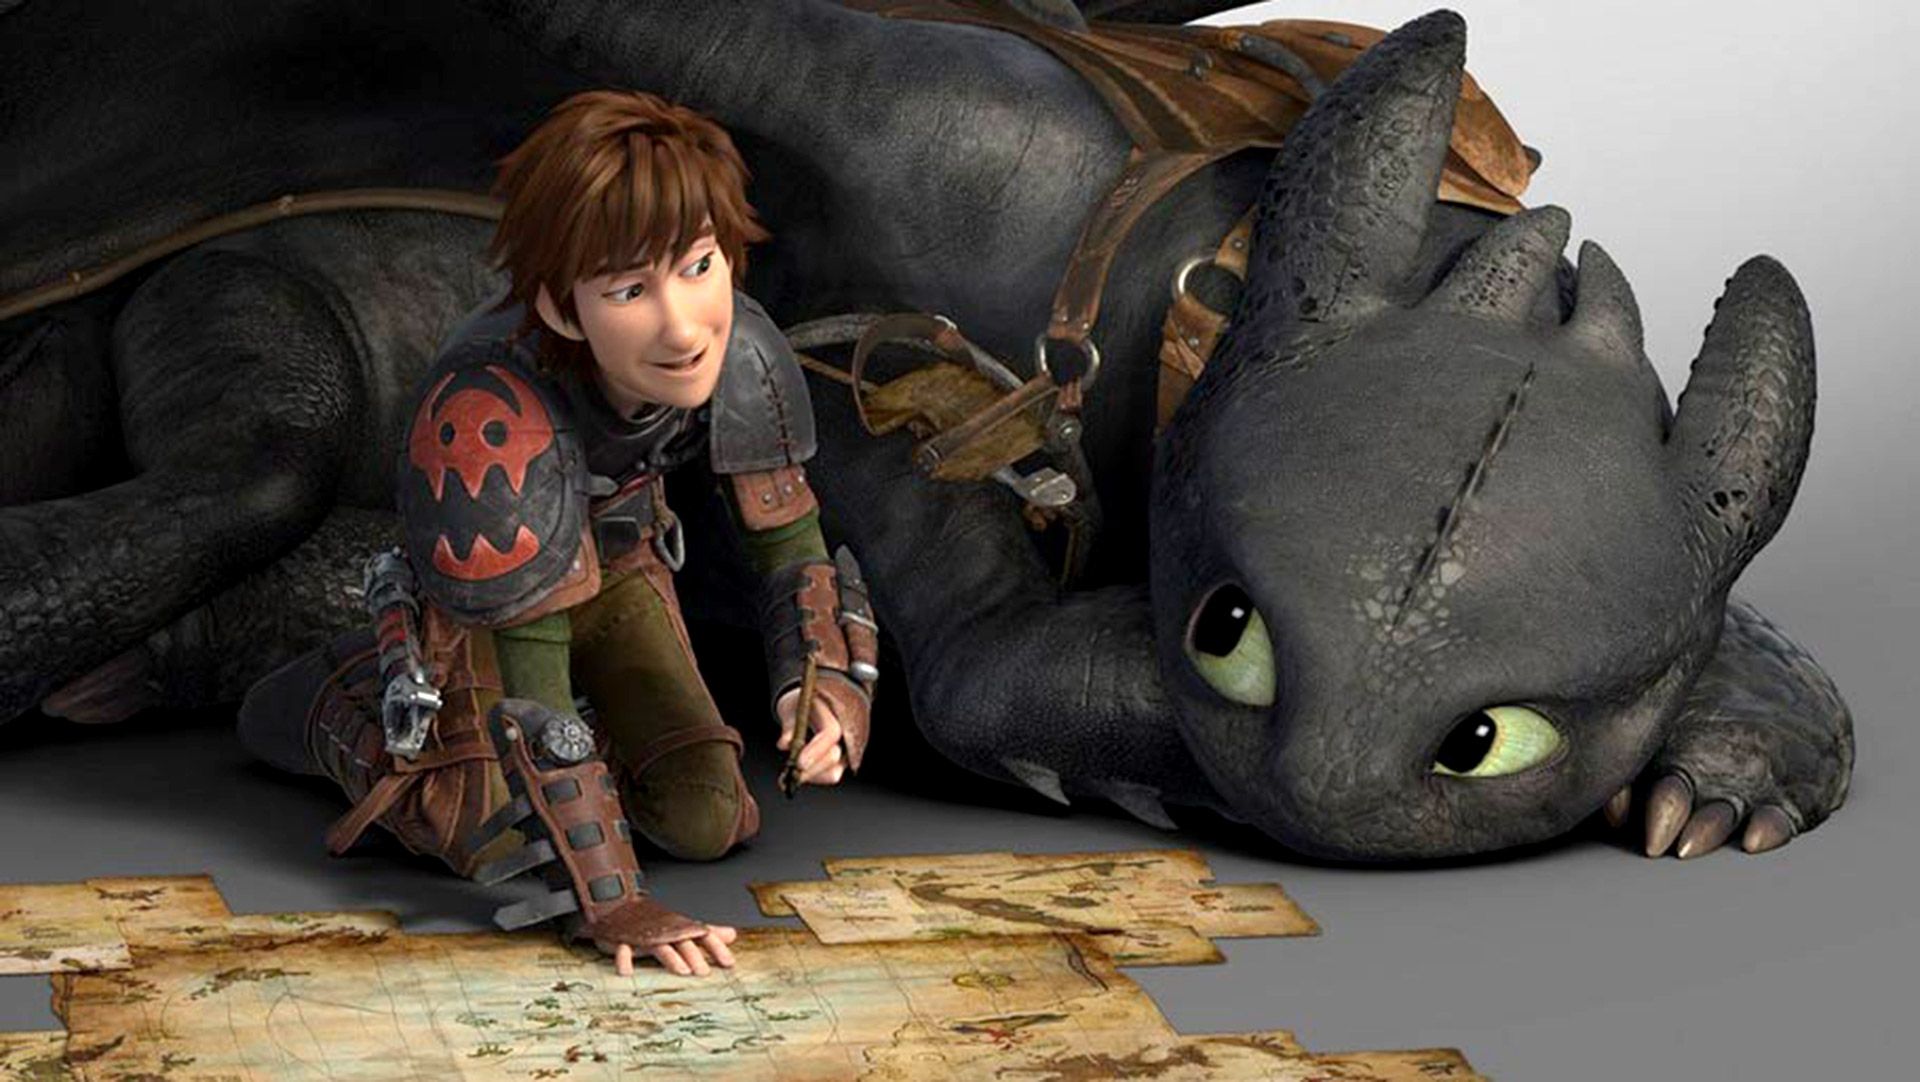 How To Train Your Dragon 2 Toothless - wallpaper.